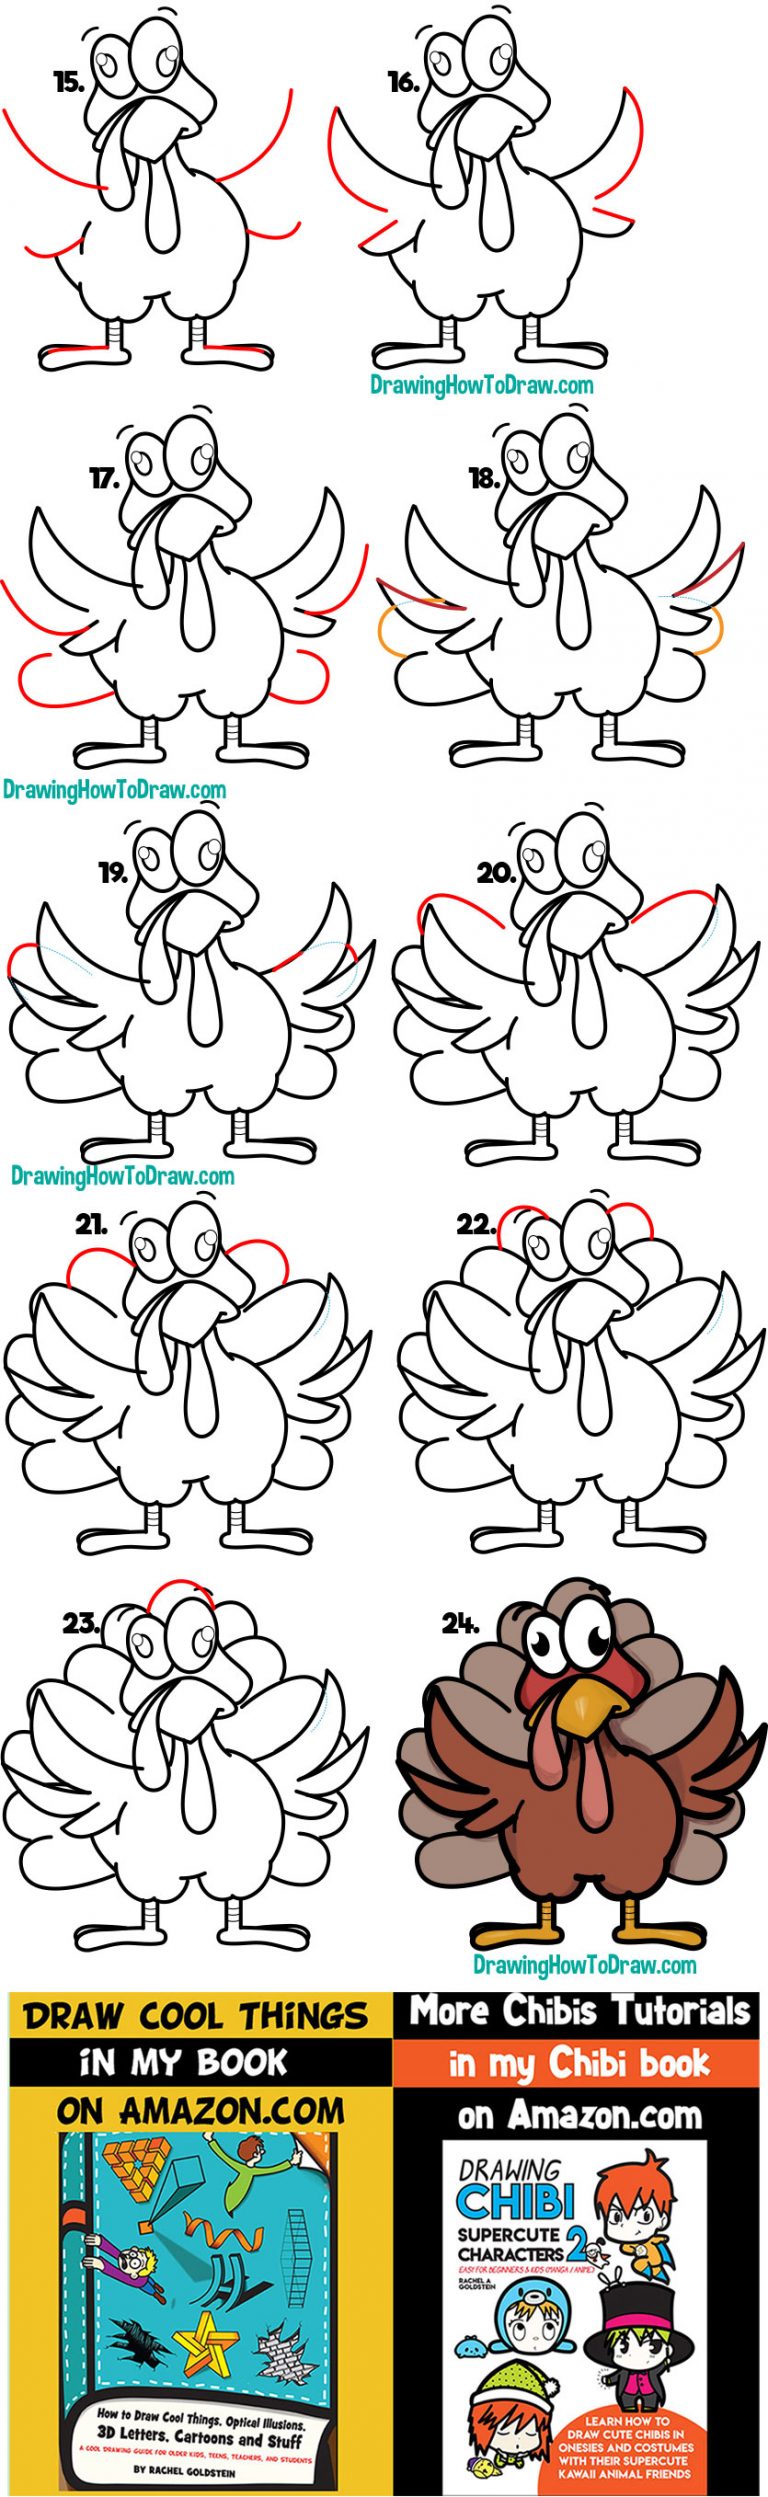 How to Draw a Cartoon Turkey for Thanksgiving Easy Step by Step Drawing